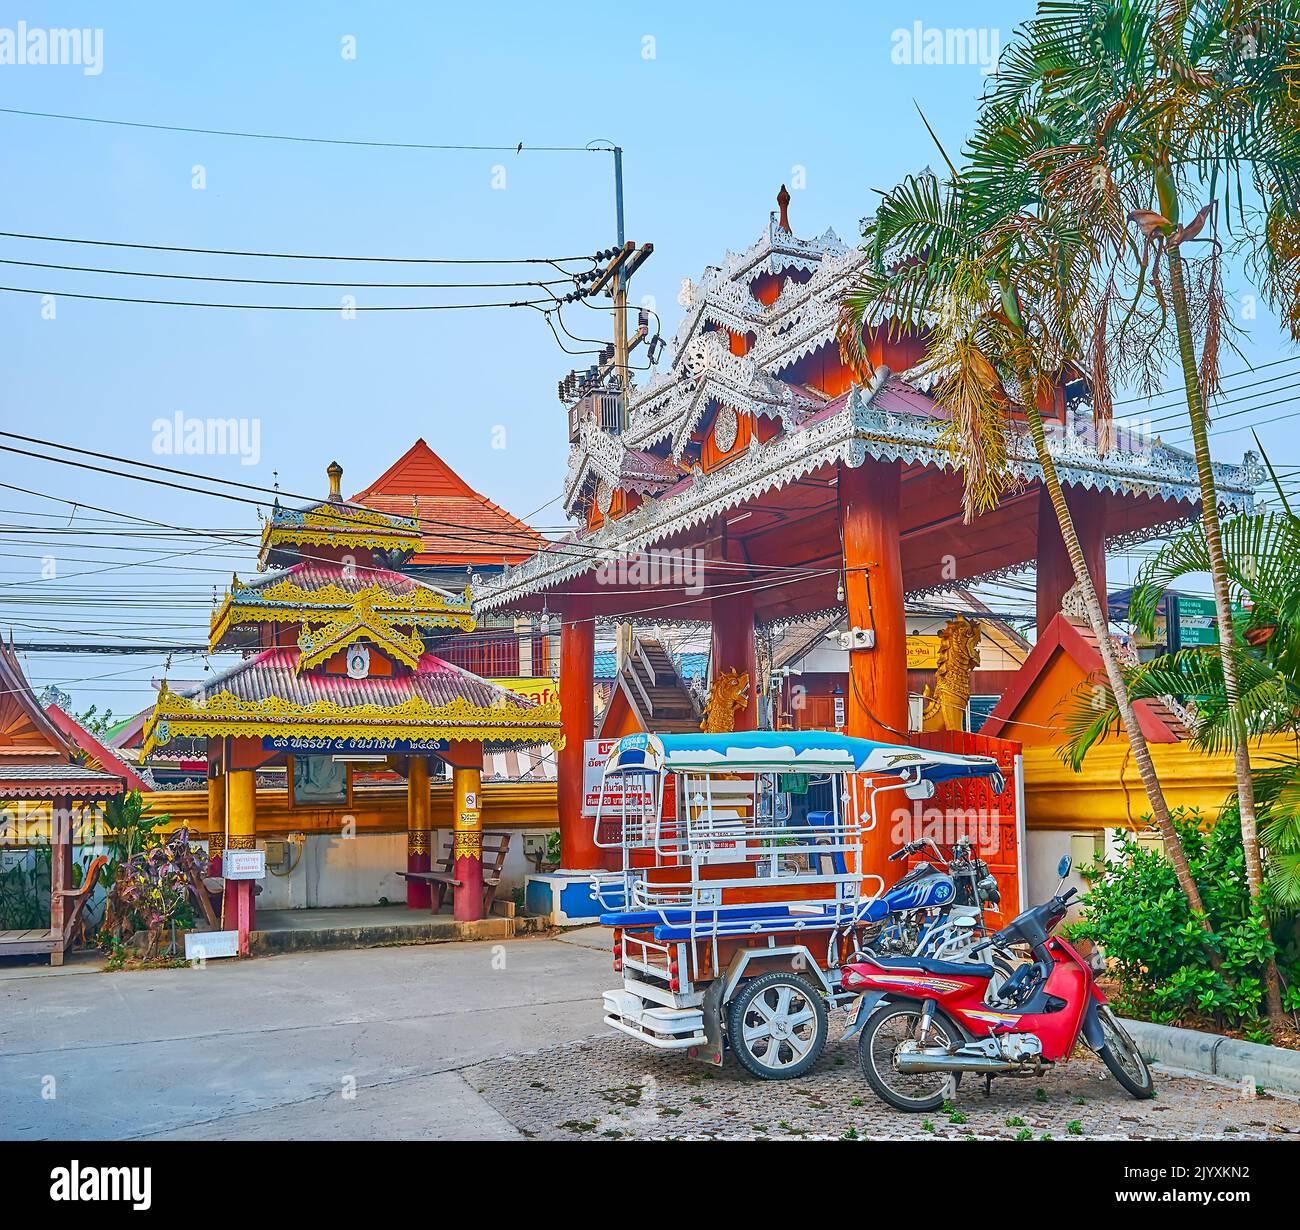 PAI, THAILAND - MAY 6, 2019: Traditional wooden gate of Wat Pa Kham temple, decorated with carved metal ornaments and massive columns, on May 6 in Pai Stock Photo